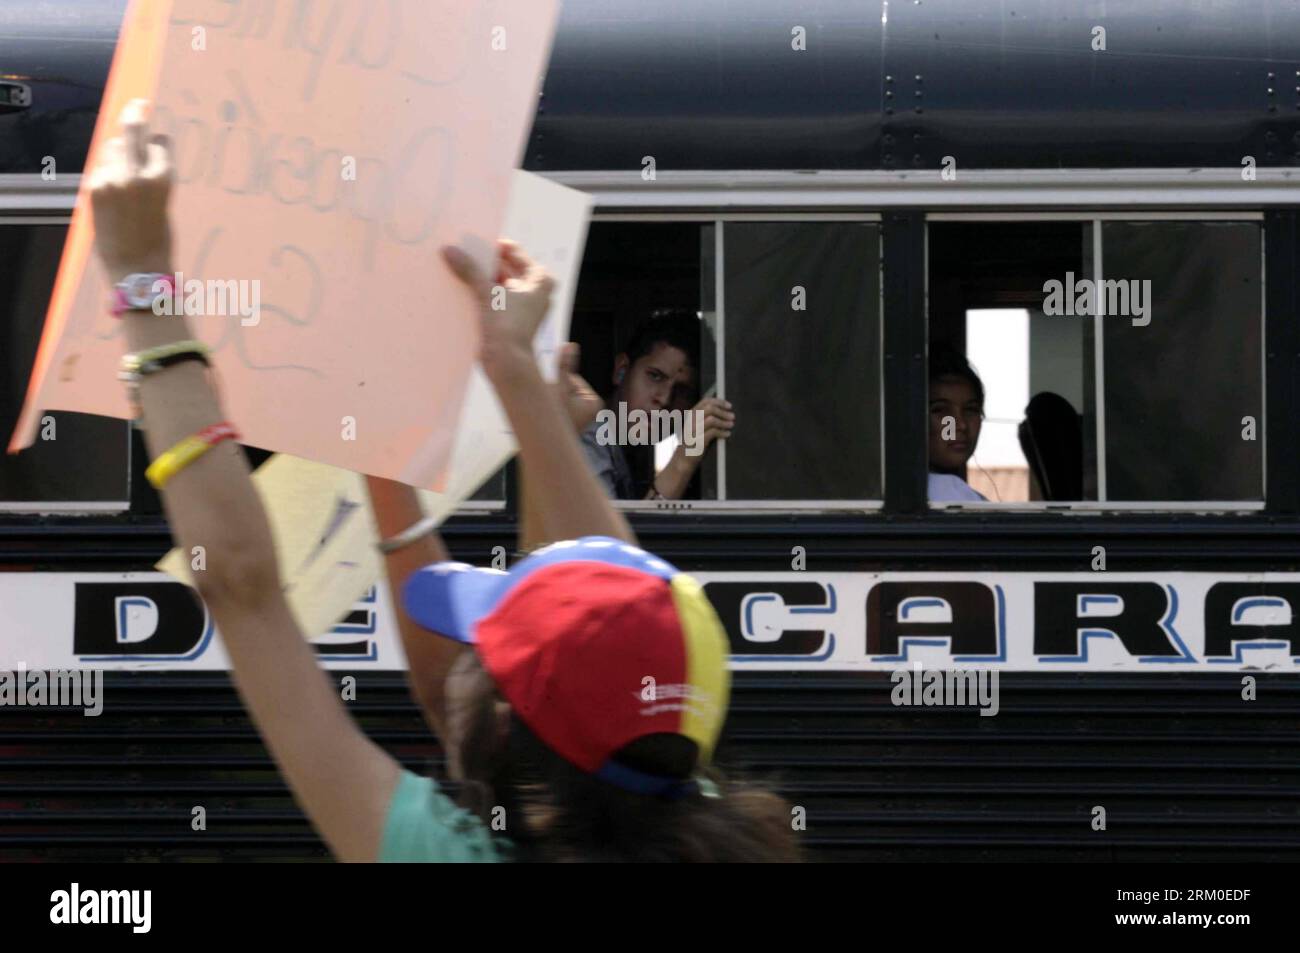 Bildnummer: 59392538  Datum: 20.03.2013  Copyright: imago/Xinhua Youngmen watch from bus windows that students shout slogans in favor to Henrique Capriles, opposition candidate for the presidency of Venezuela in Naguanagua, Venezuela, on March 20, 2013. Venezuela s elections will be held on April 14. (Xinhua/Juan Carlos Hernandez) (itm) VENEZUELA-NAGUANAGUA-POLITICS-ELECTIONS PUBLICATIONxNOTxINxCHN Gesellschaft Politik Demo Protest Wahl Opposition x0x xdd premiumd 2013 quer     59392538 Date 20 03 2013 Copyright Imago XINHUA Youngme Watch from Bus Windows Thatcher Students Shout Slogans in fav Stock Photo